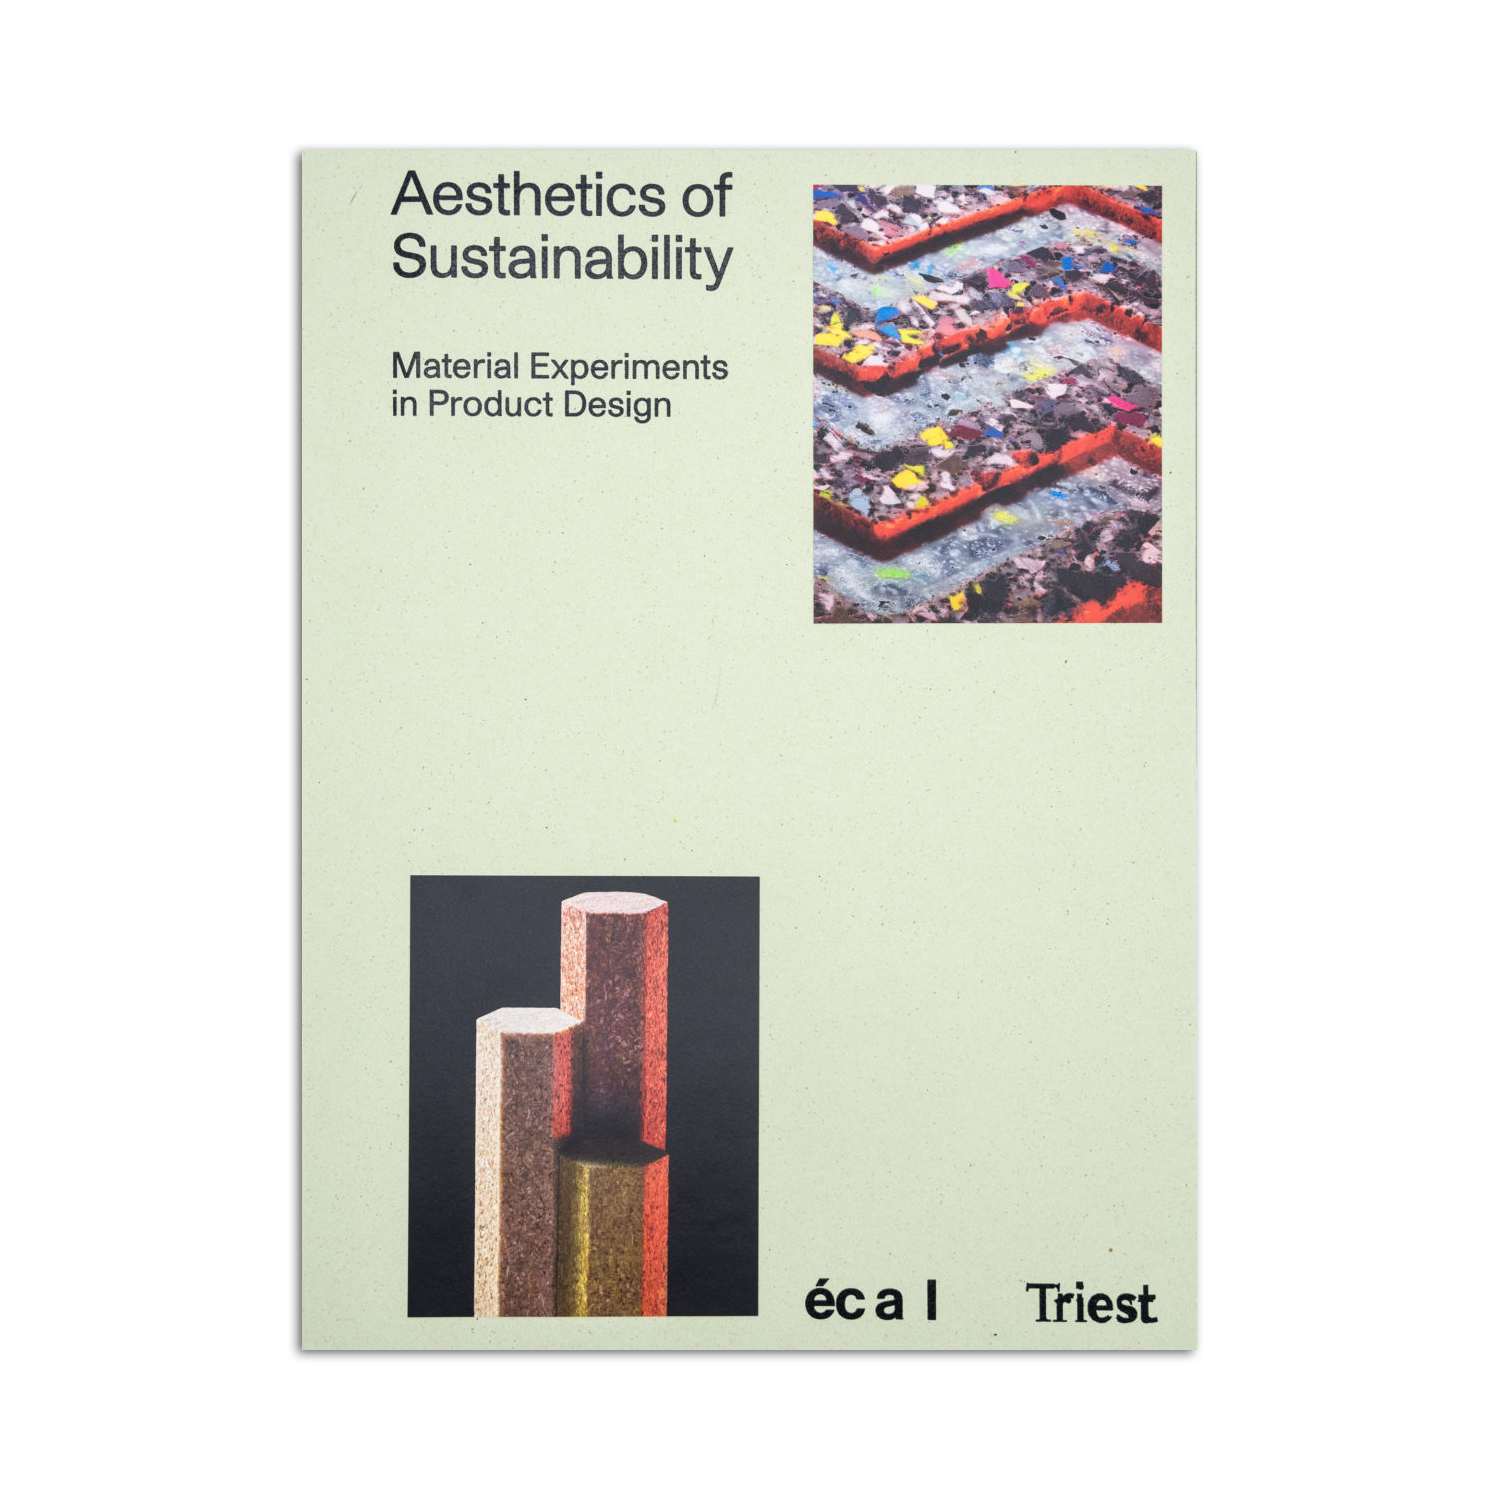 Aesthetics of Sustainability: Material Experiments in Product Design